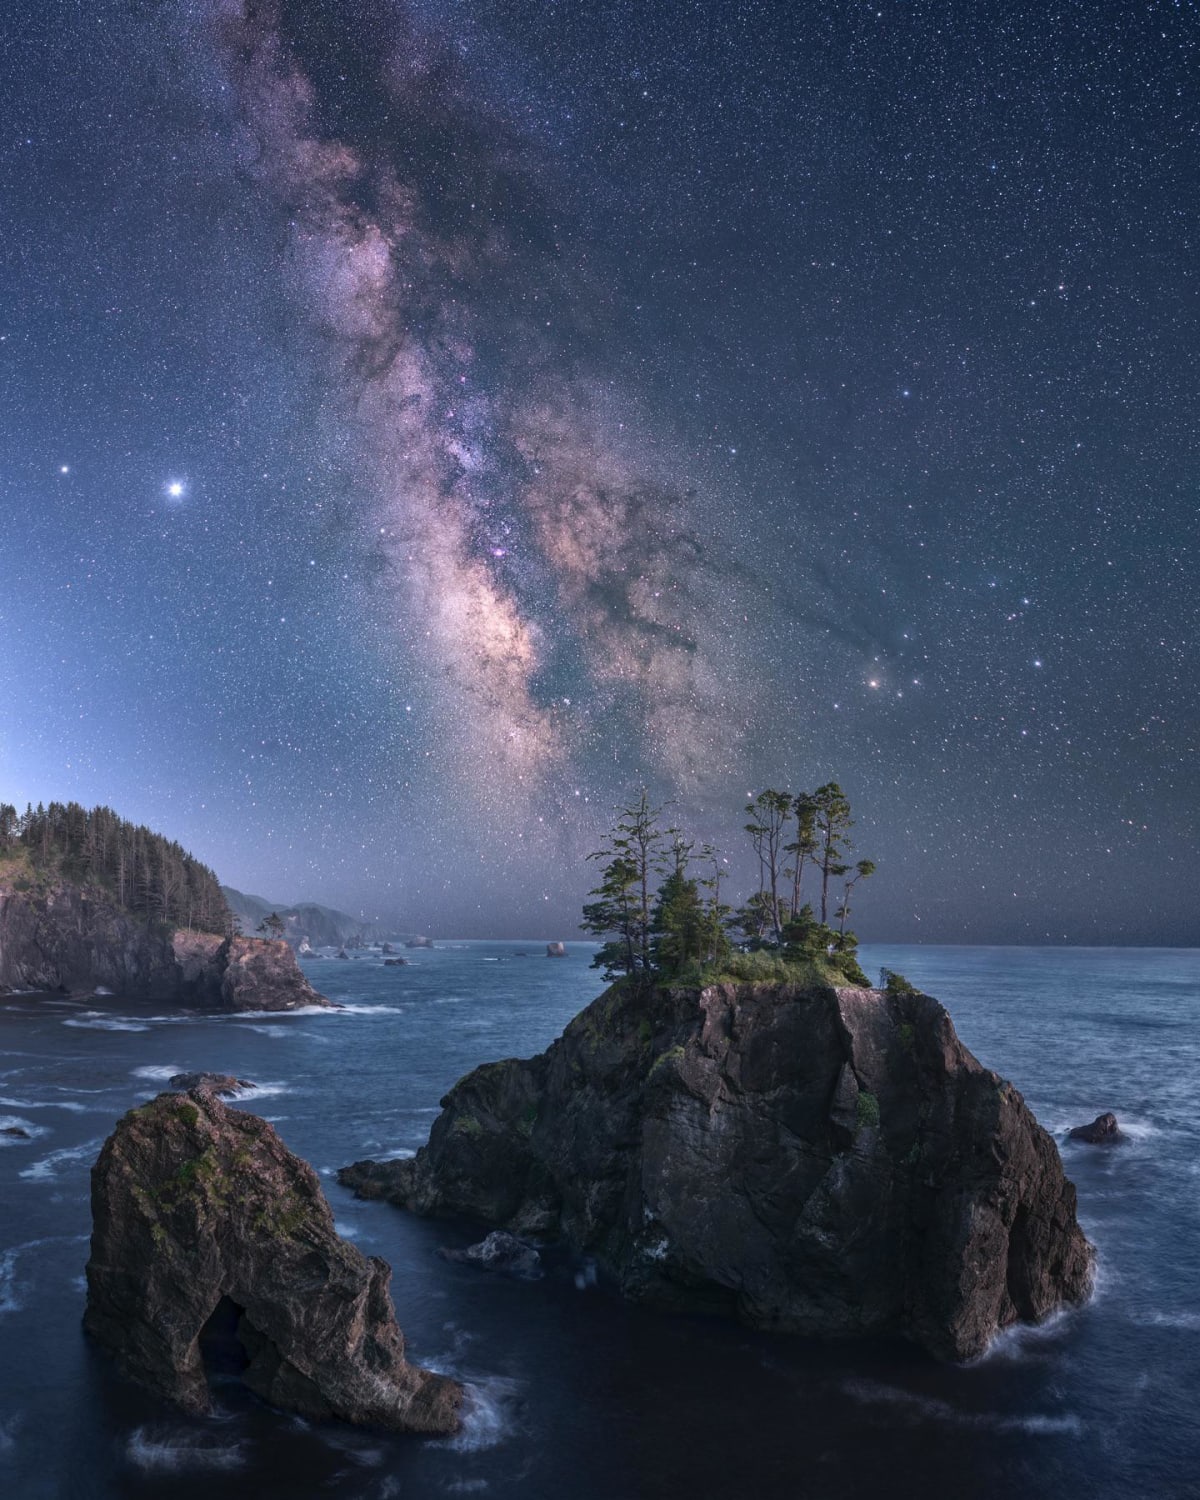 The Milky Way rising over the Oregon coast ||